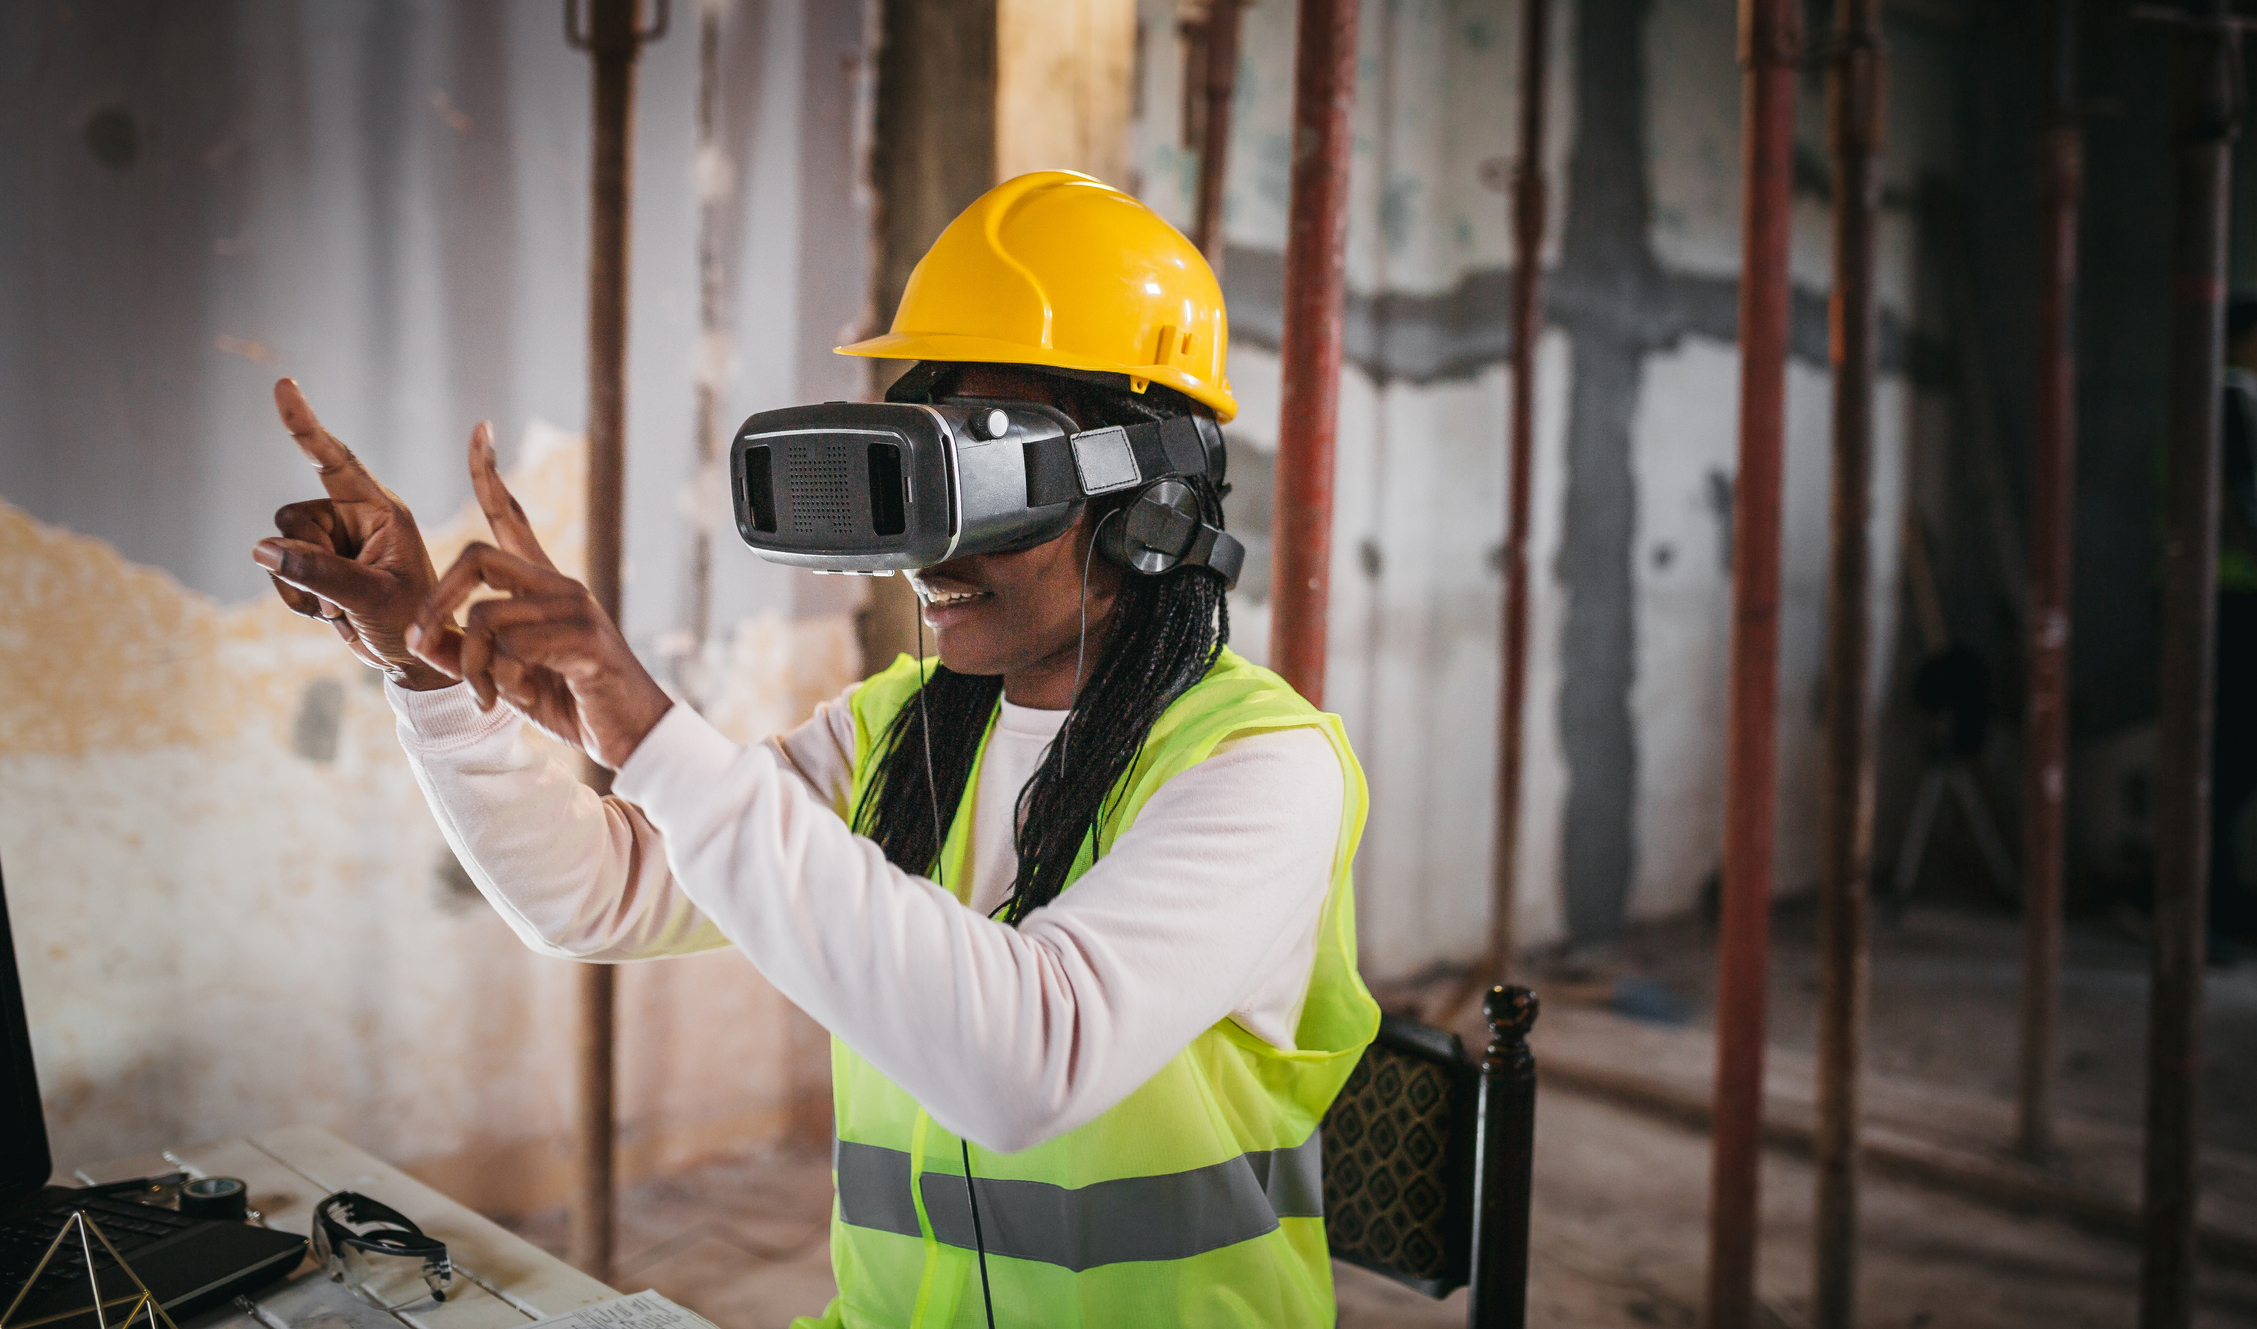 What May the Construction Industry Make of the “Metaverse”?